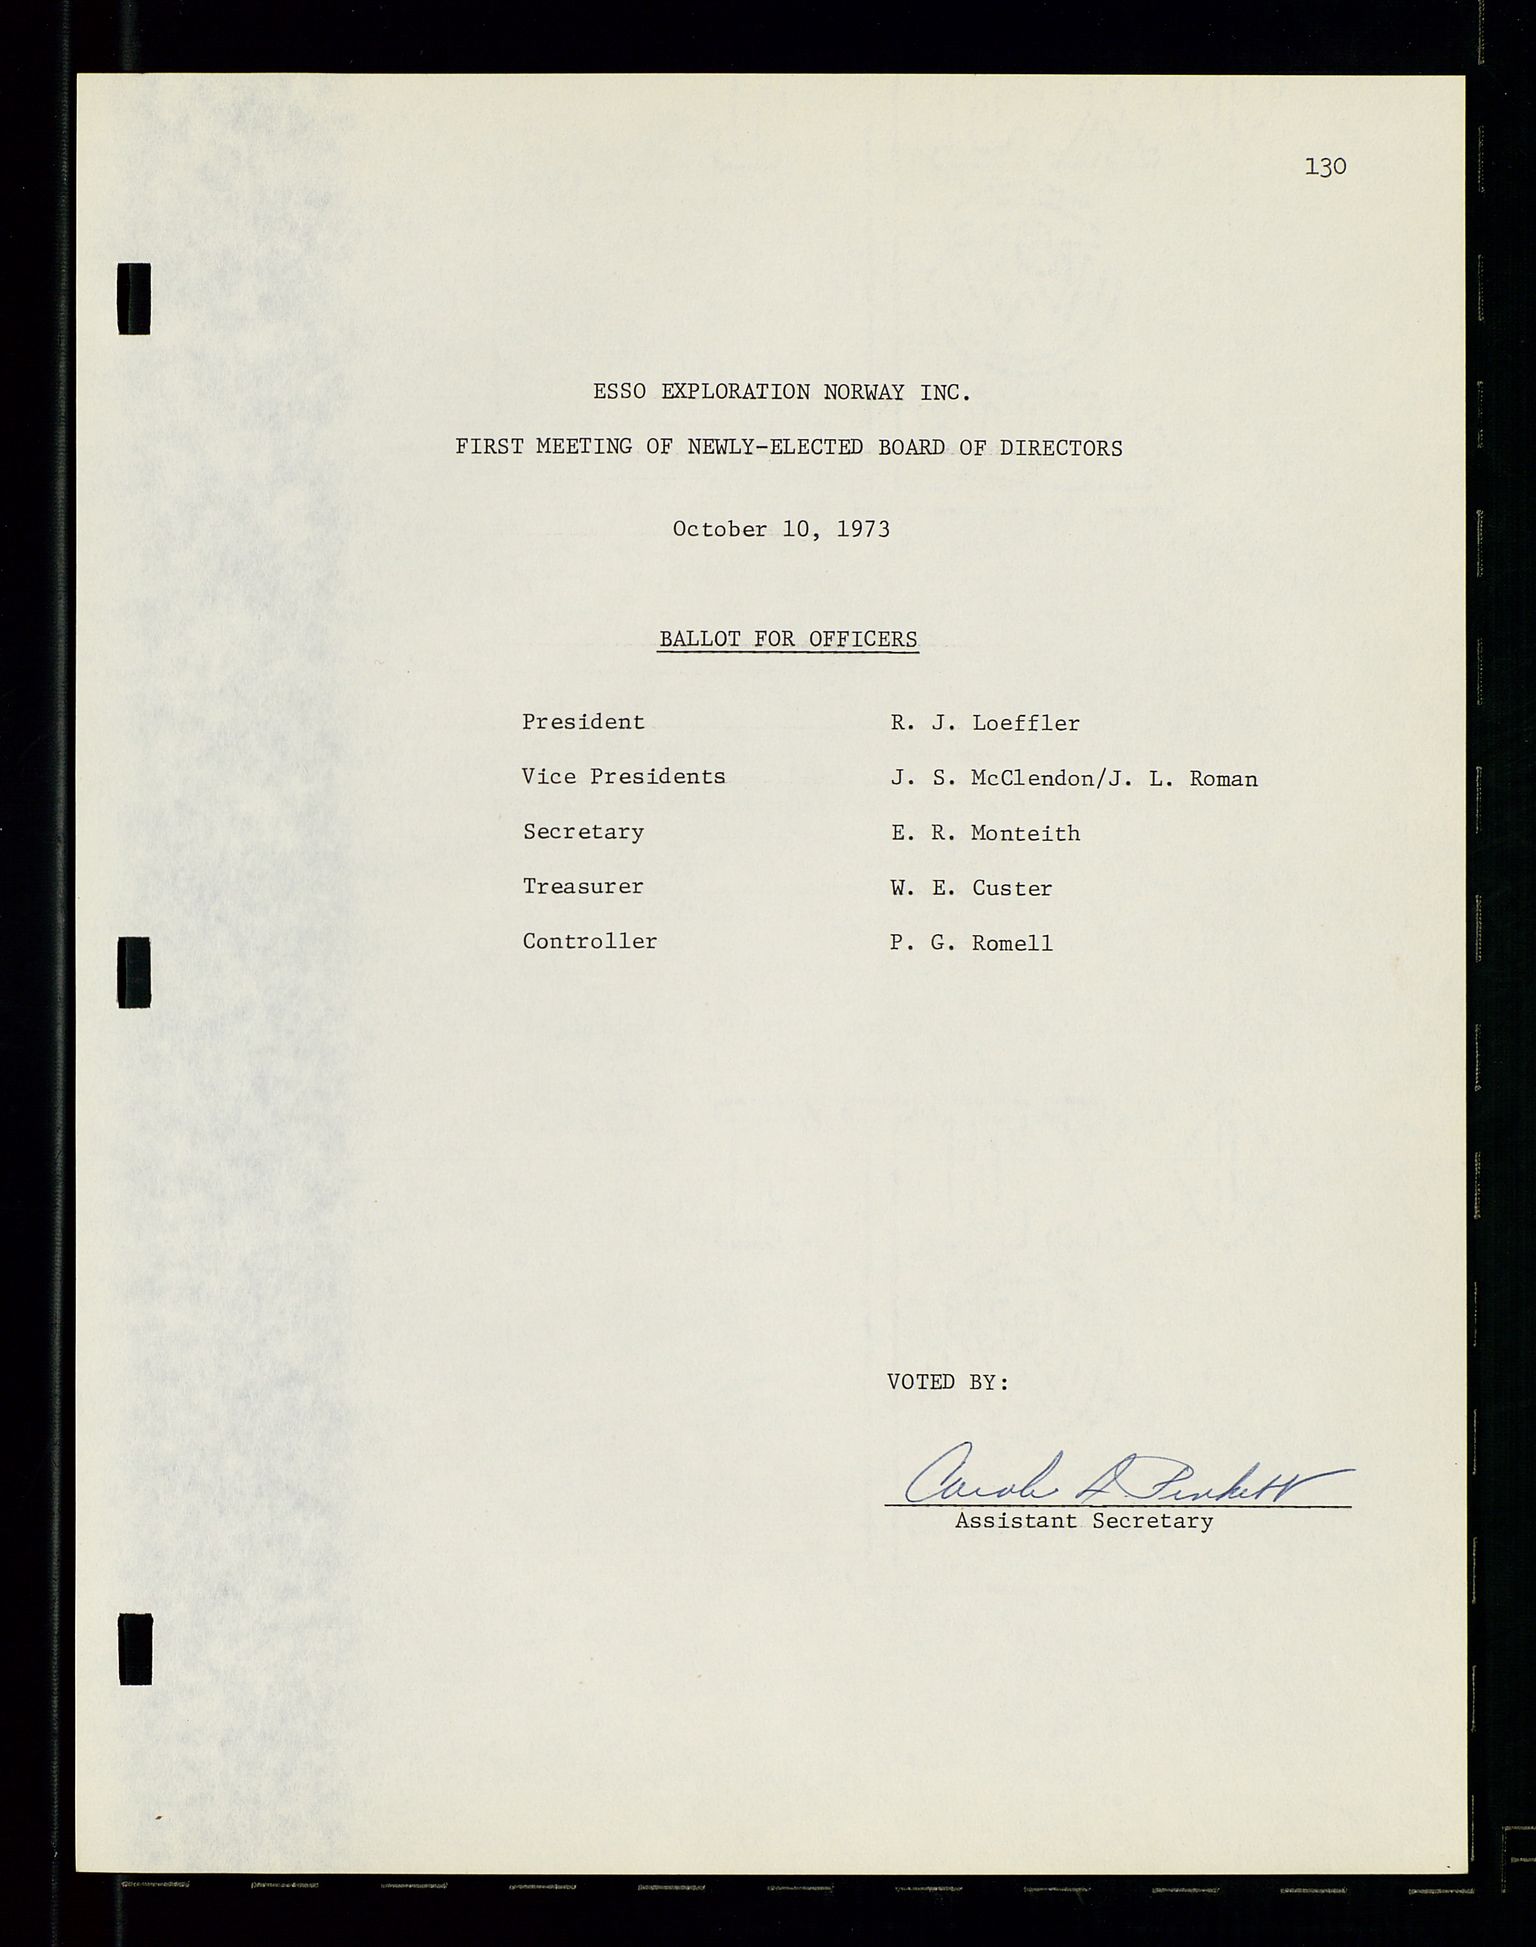 Pa 1512 - Esso Exploration and Production Norway Inc., SAST/A-101917/A/Aa/L0001/0001: Styredokumenter / Corporate records, By-Laws, Board meeting minutes, Incorporations, 1965-1975, s. 130